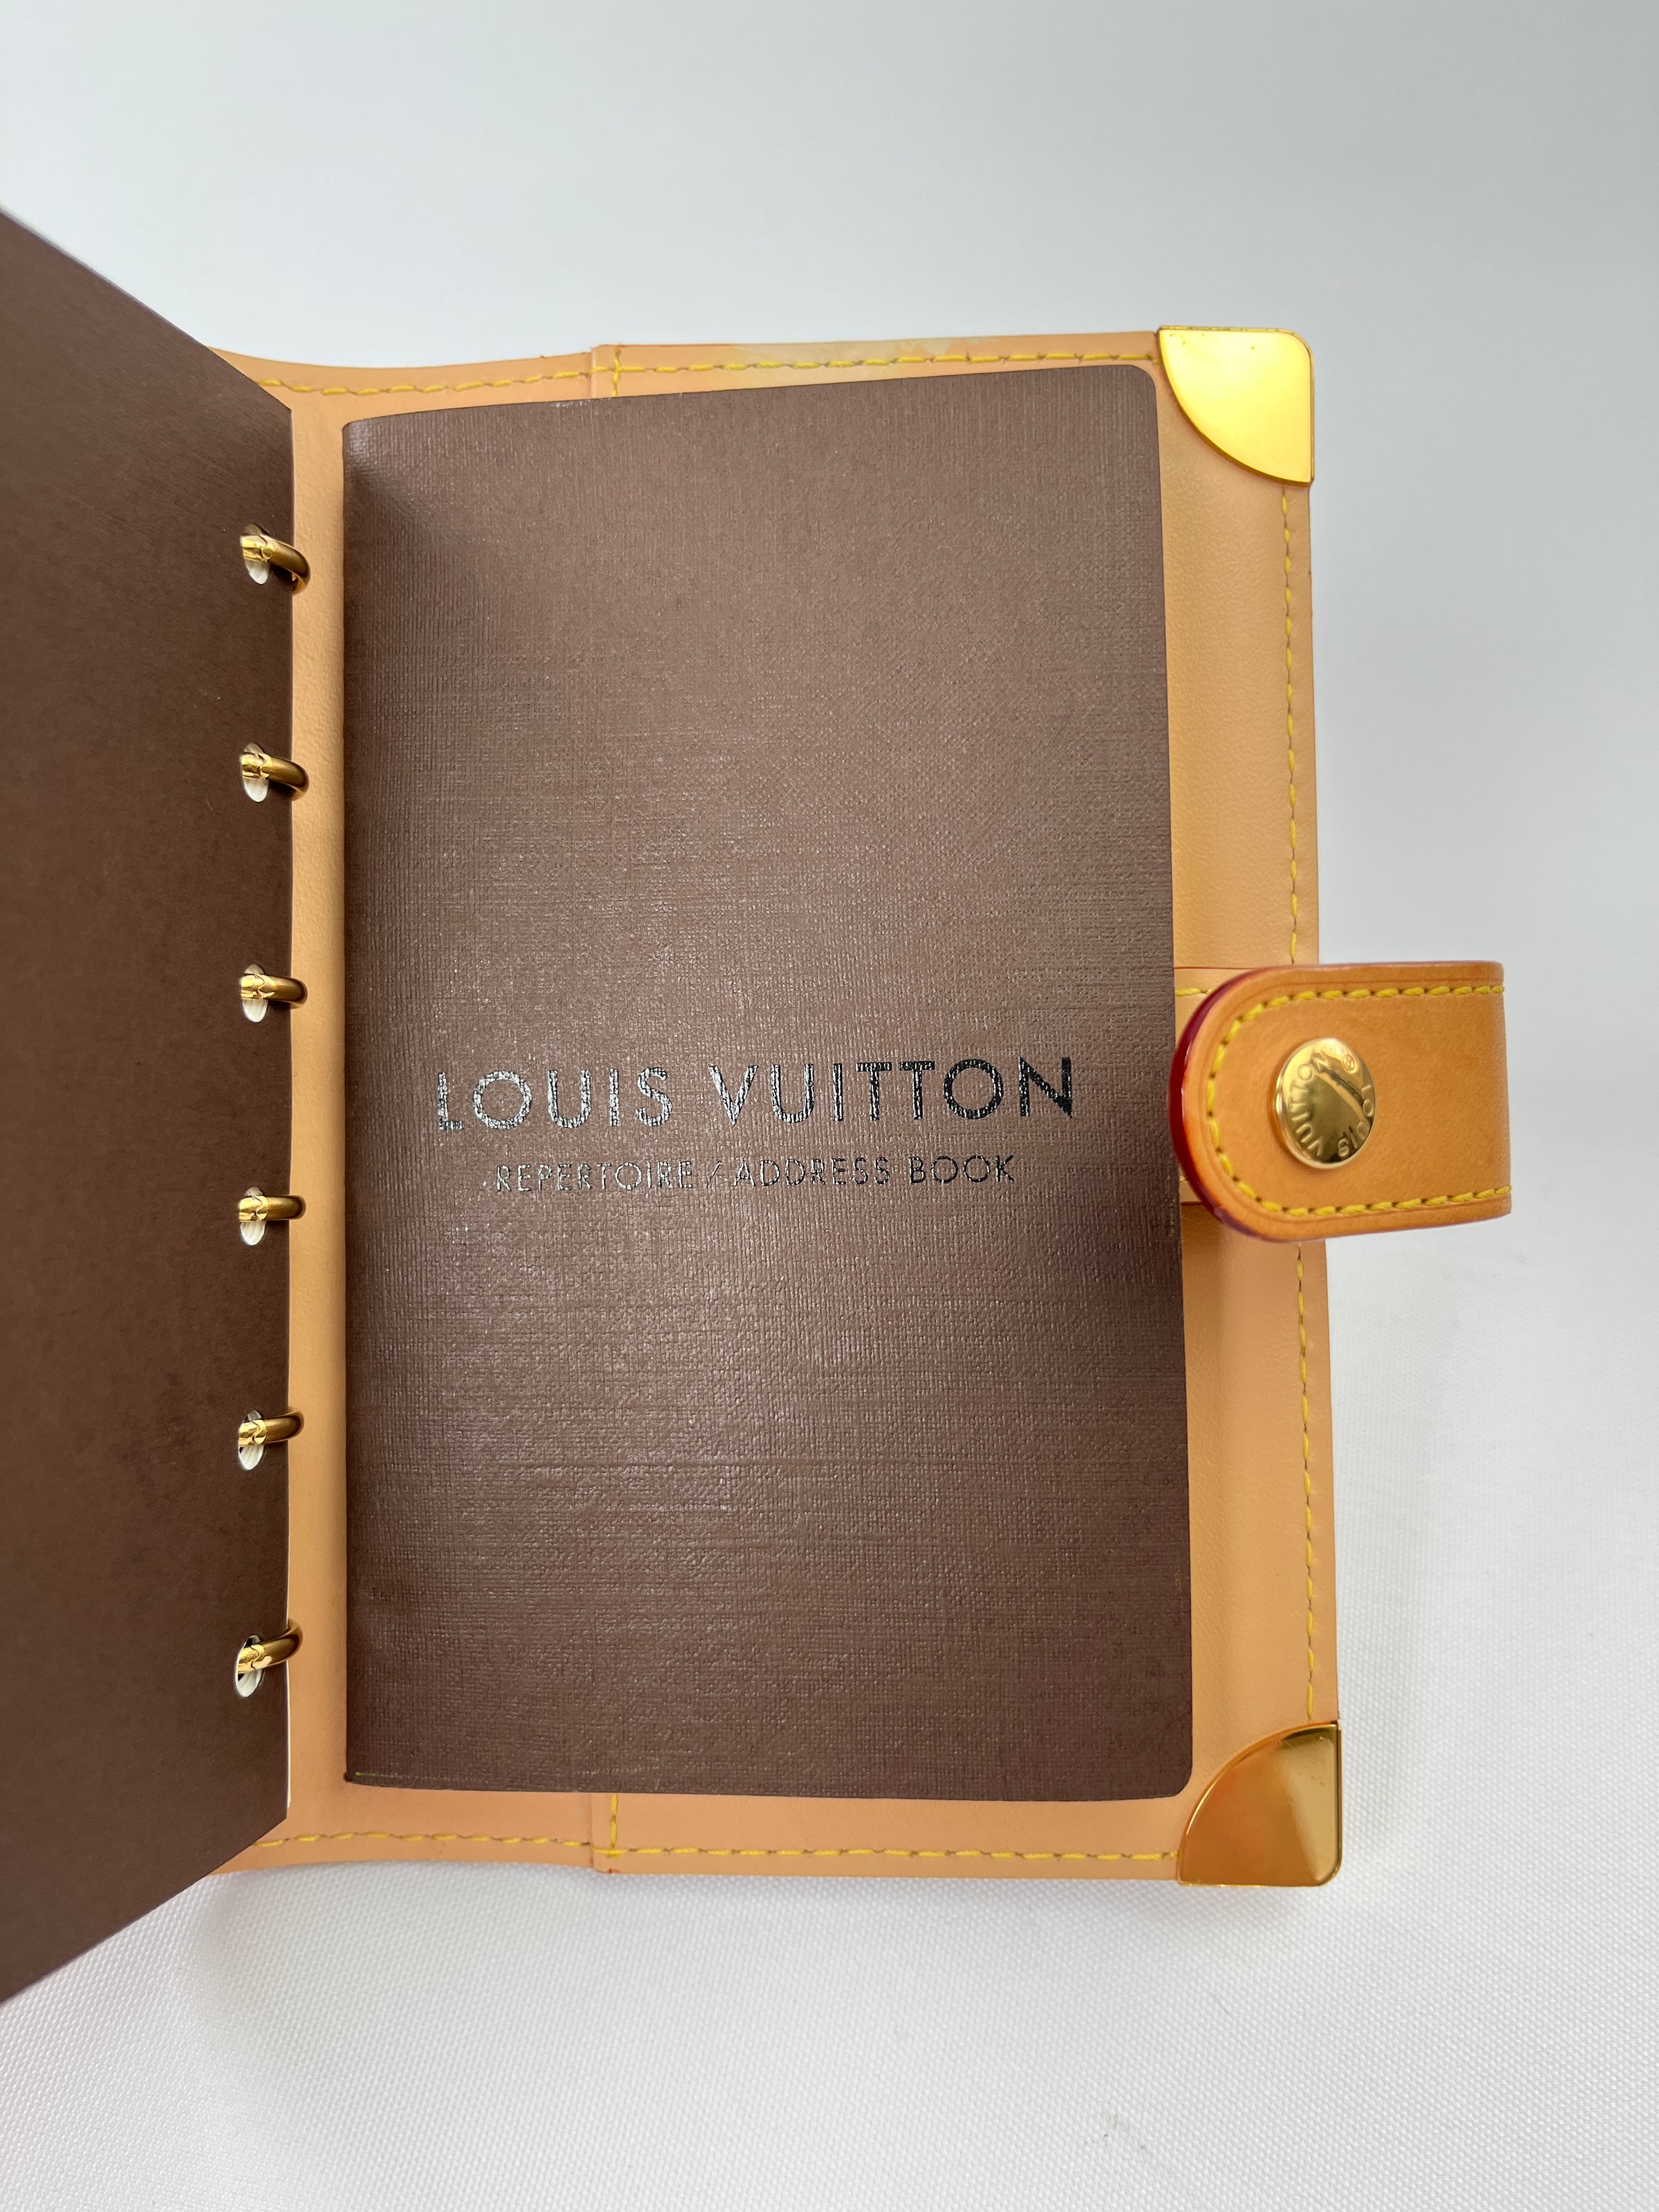 Louis Vuitton Note pad refill and Repertoire/address Book